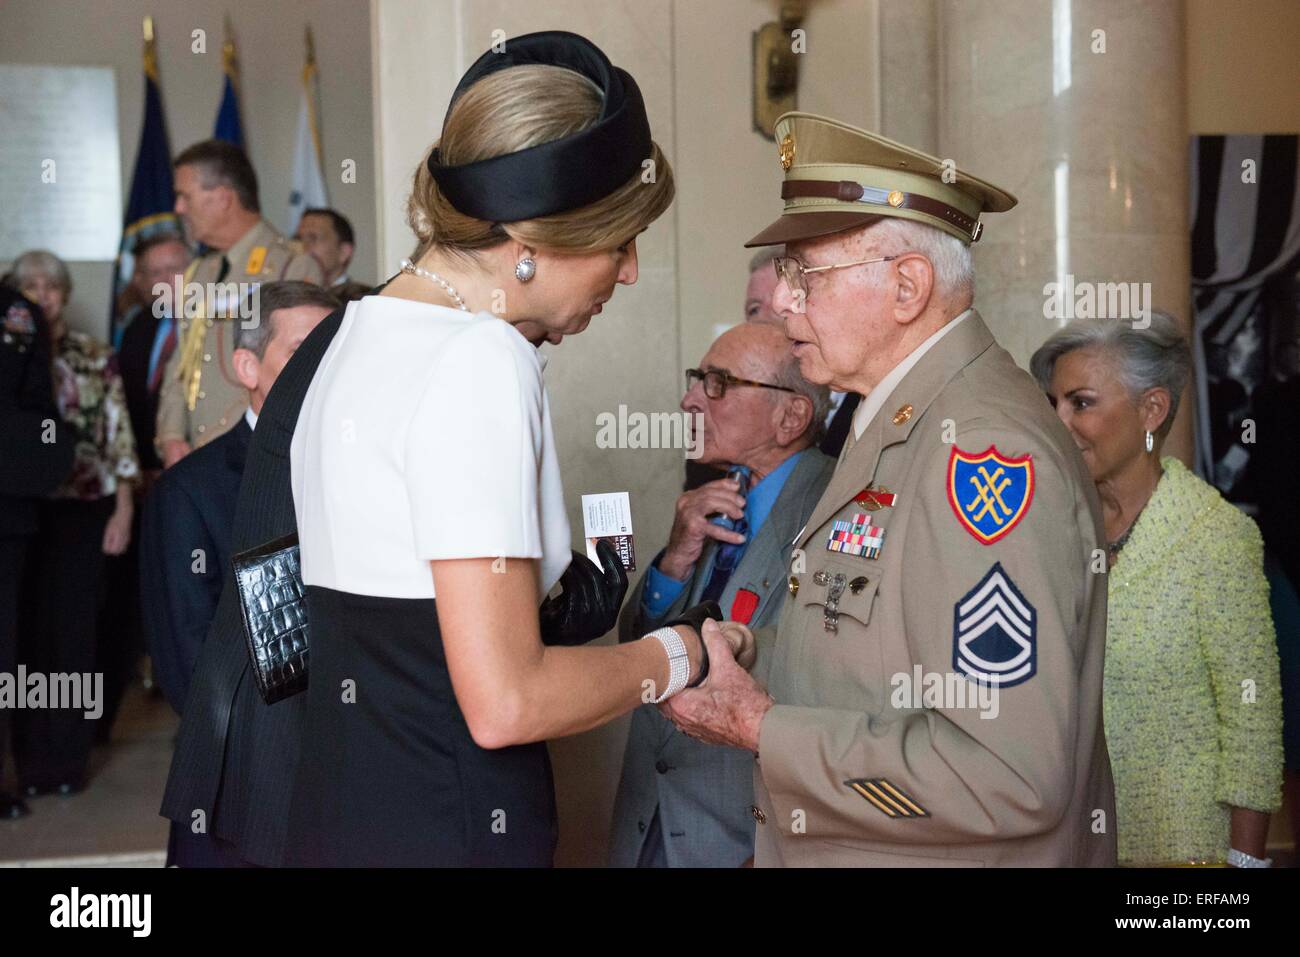 Queen Maxima of the Netherlands meets with World War II and Korean War veteran Don Bertinoduring during a visit to the Memorial Display Room at Arlington National Cemetery June 1, 2015, in Arlington, Virginia. The royal couple later placed a wreath at the Tomb of the Unknown Soldier and then met with veterans from World War II. Stock Photo